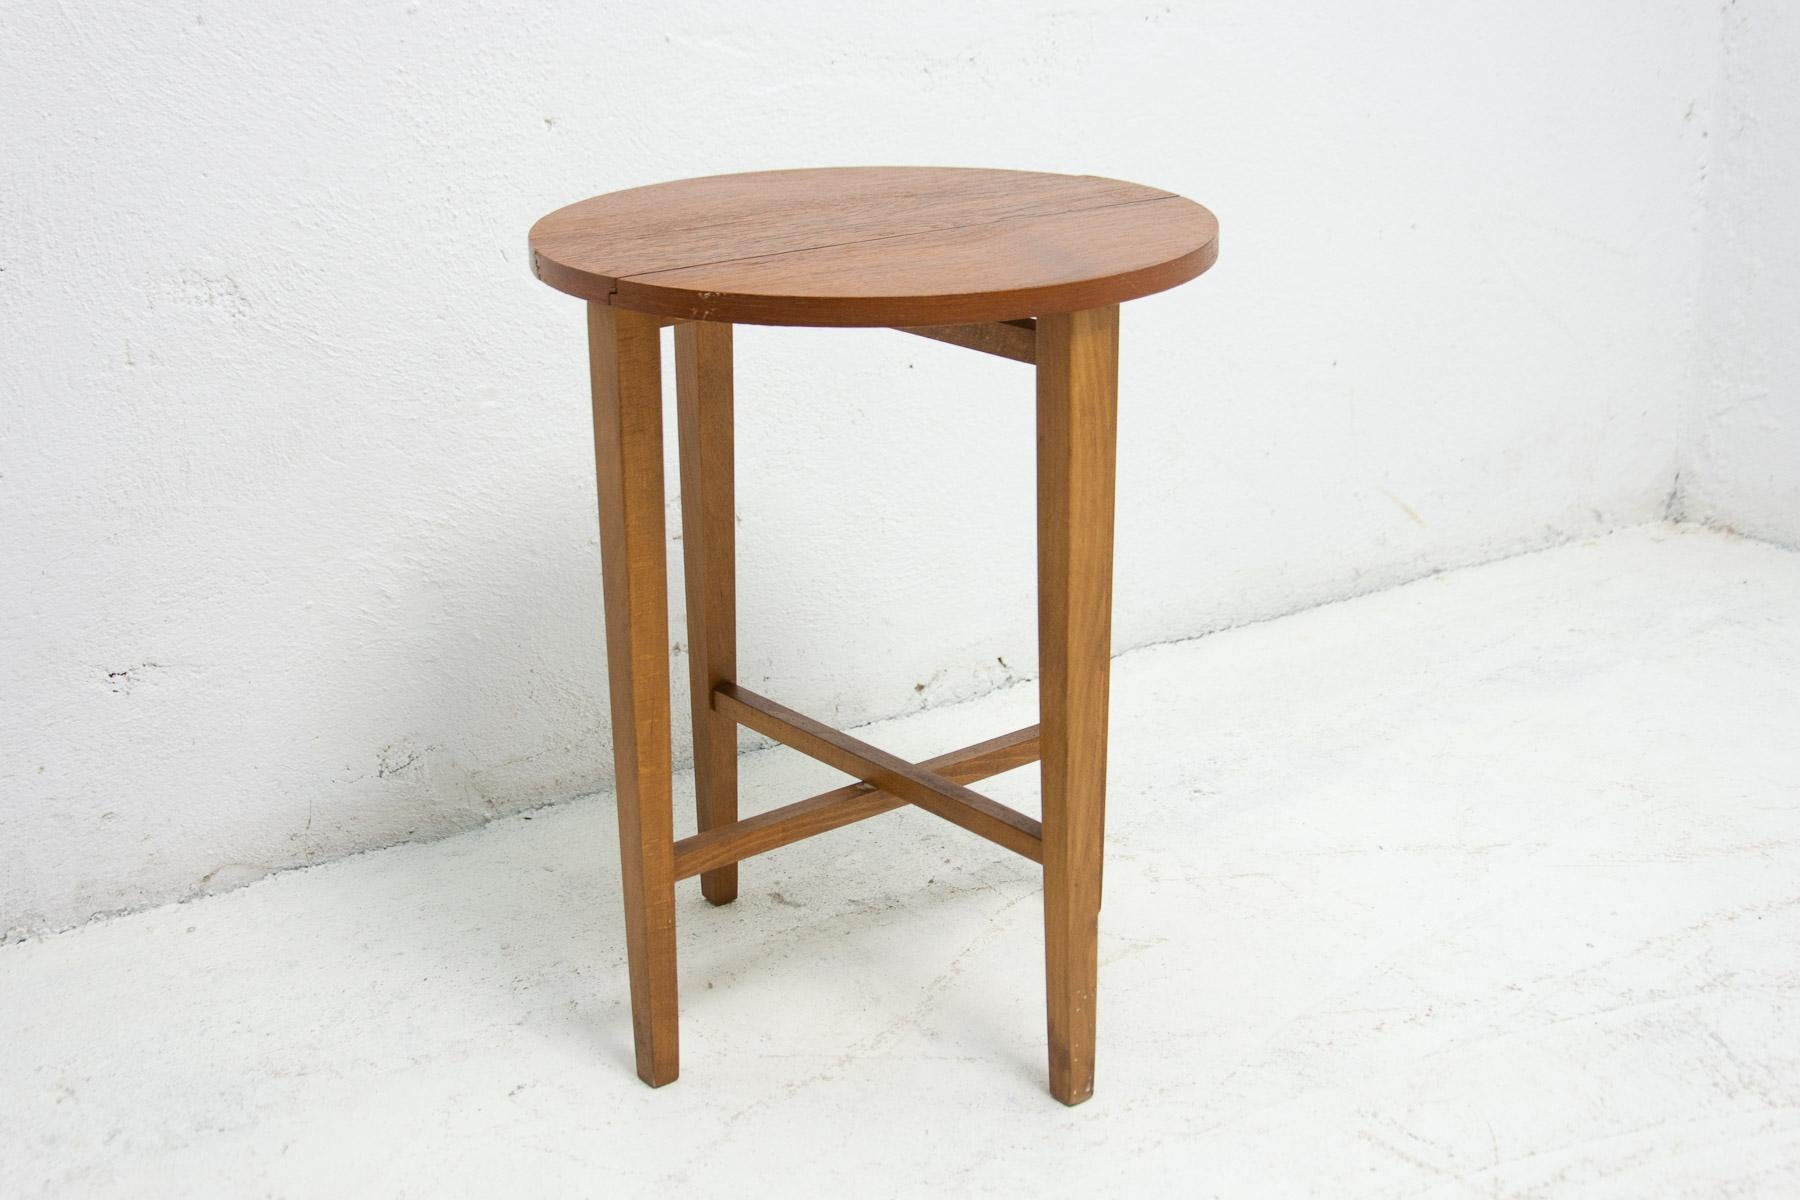 Wood Set of Four Nesting Tables, Designed by Poul Hundevad, 1960's For Sale